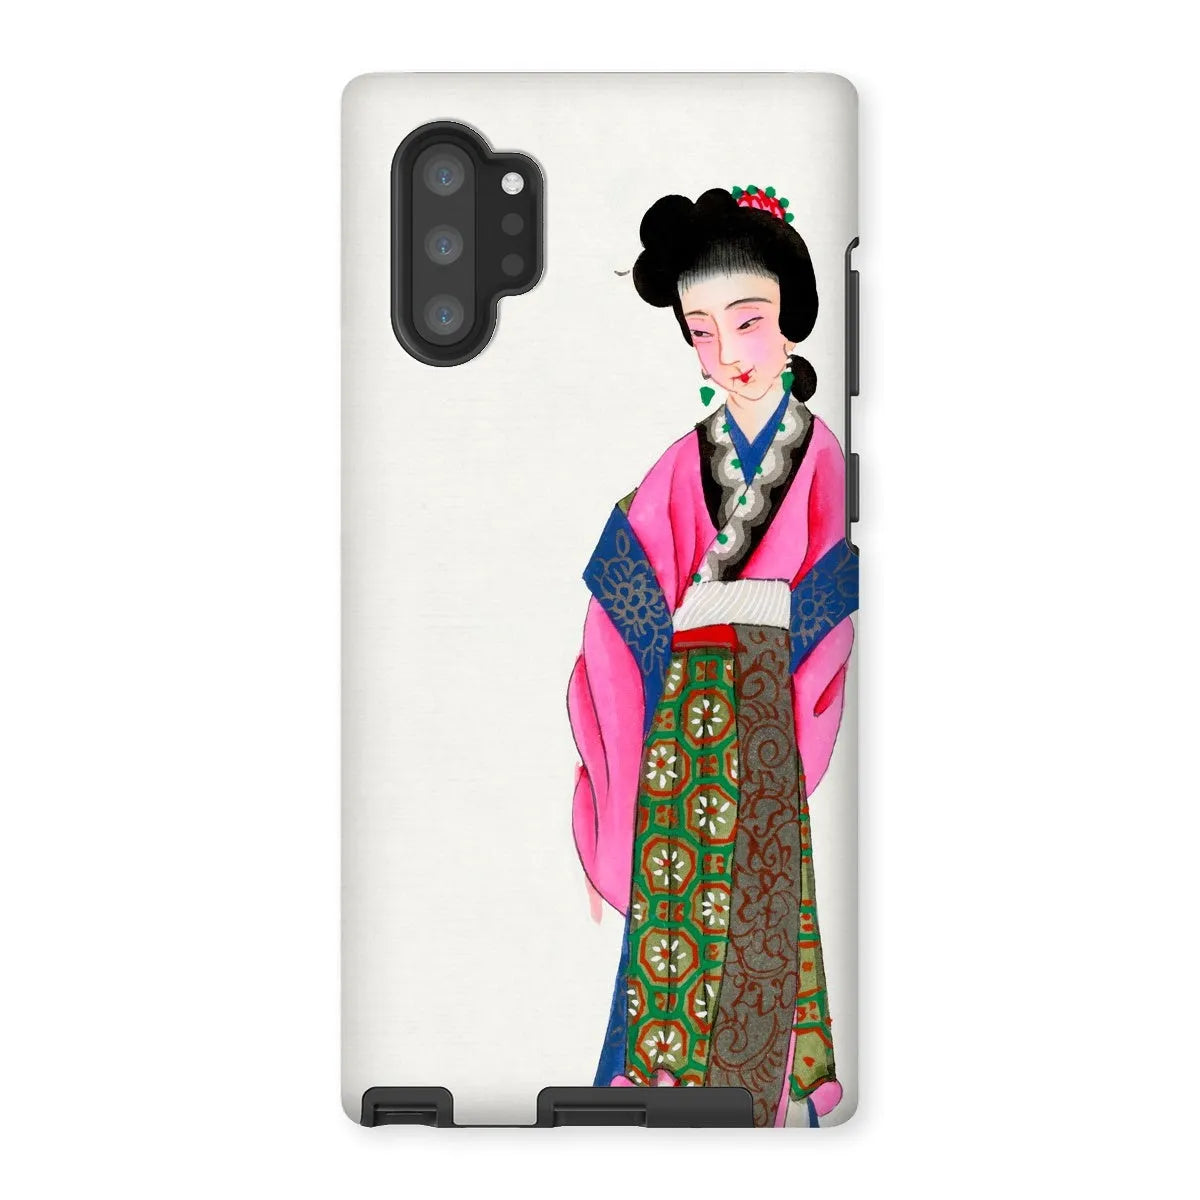 Noblewoman - Chinese Aesthetic Manchu Art Phone Case - Samsung Galaxy Note 10p / Matte - Mobile Phone Cases - Aesthetic